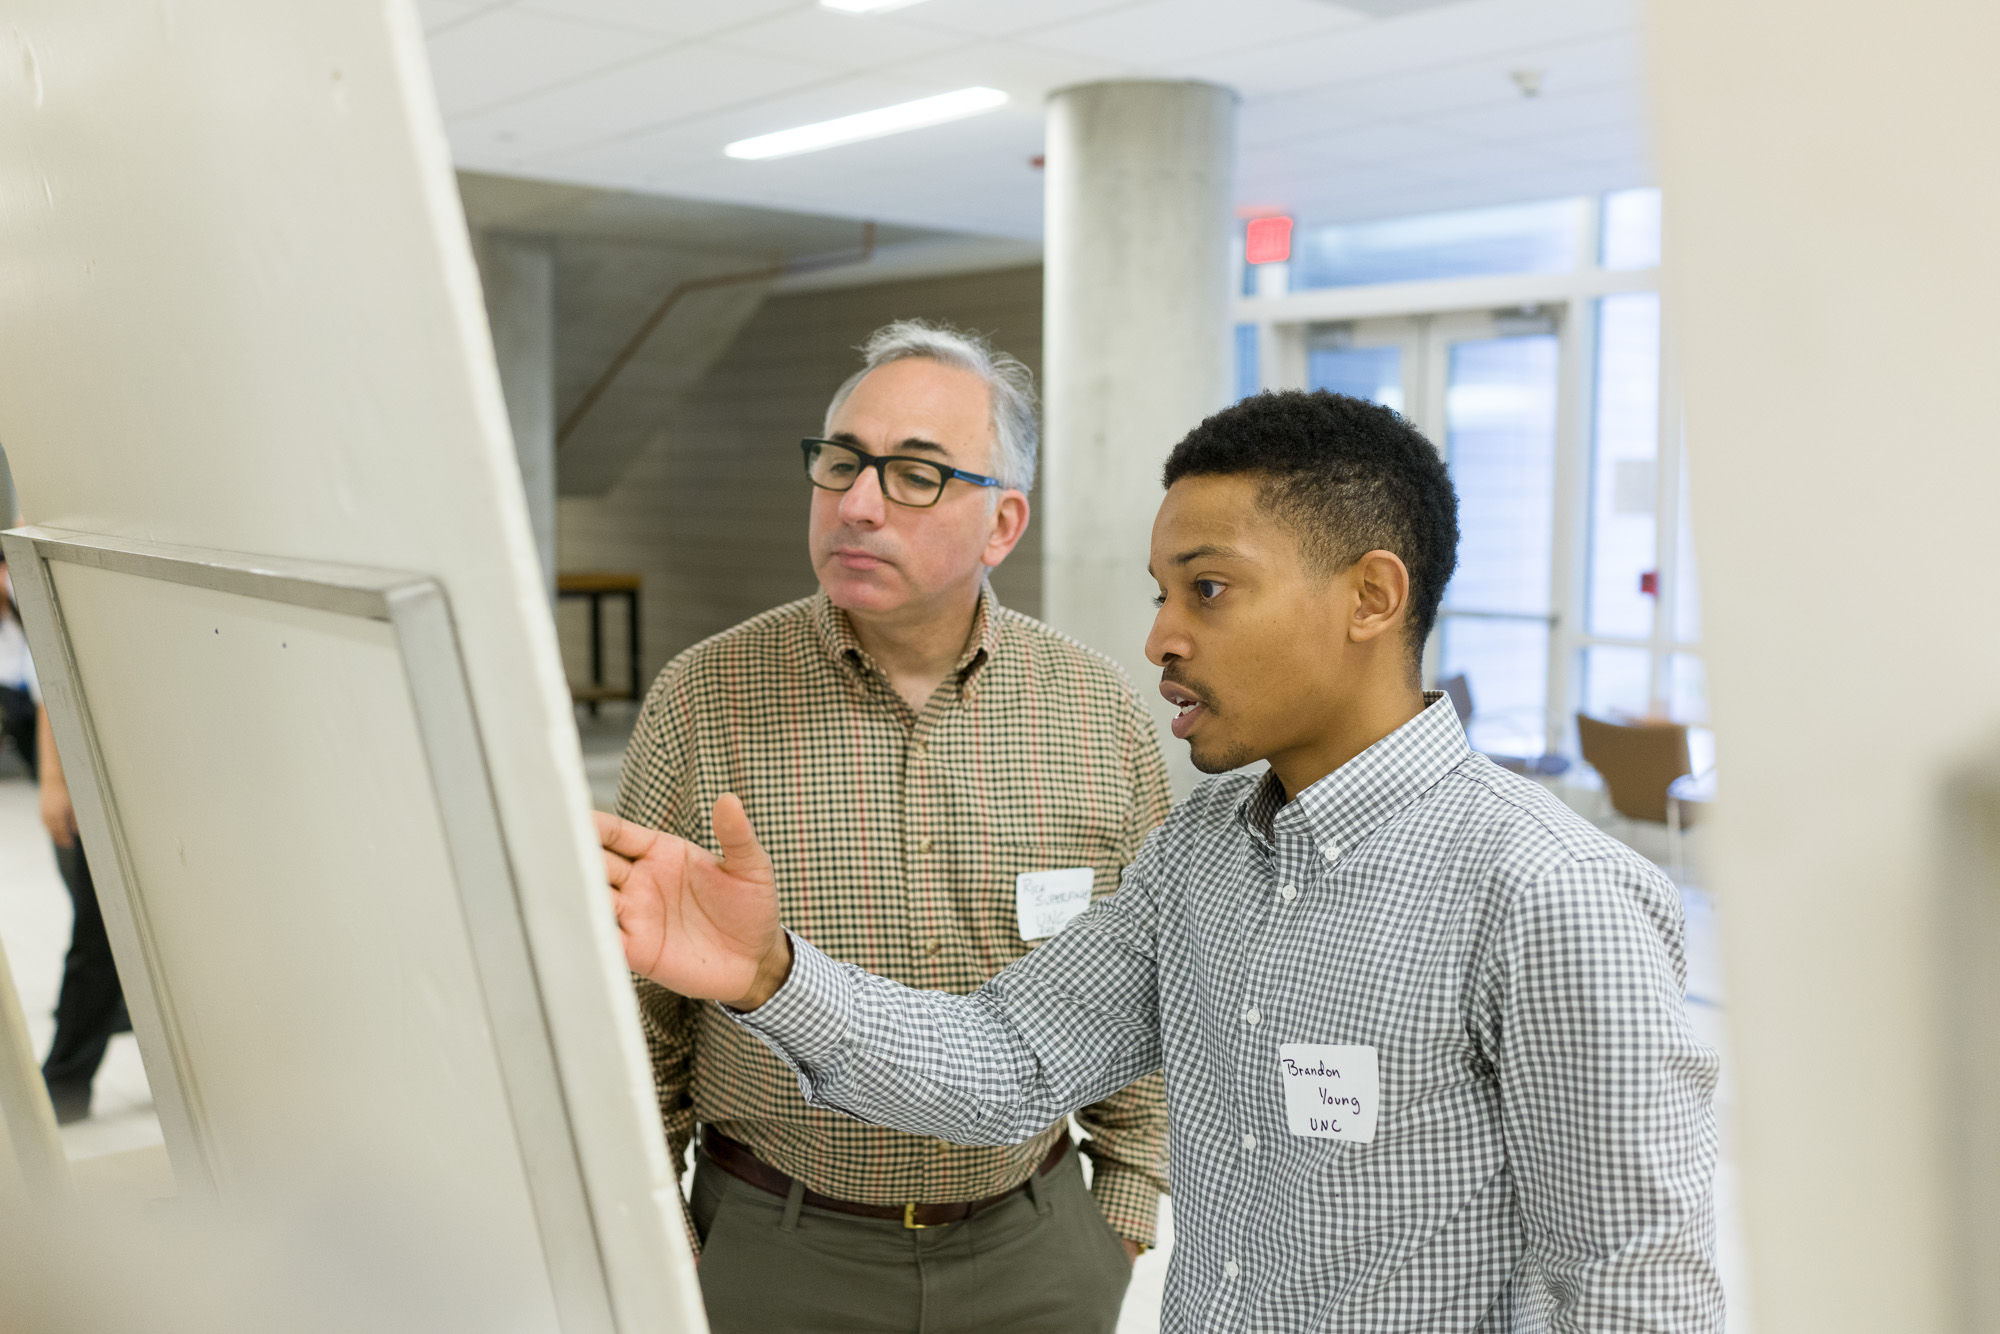 Two men discussing in front of a research poster; one wears a name tag labeled 'Brandon Young - UNC'.